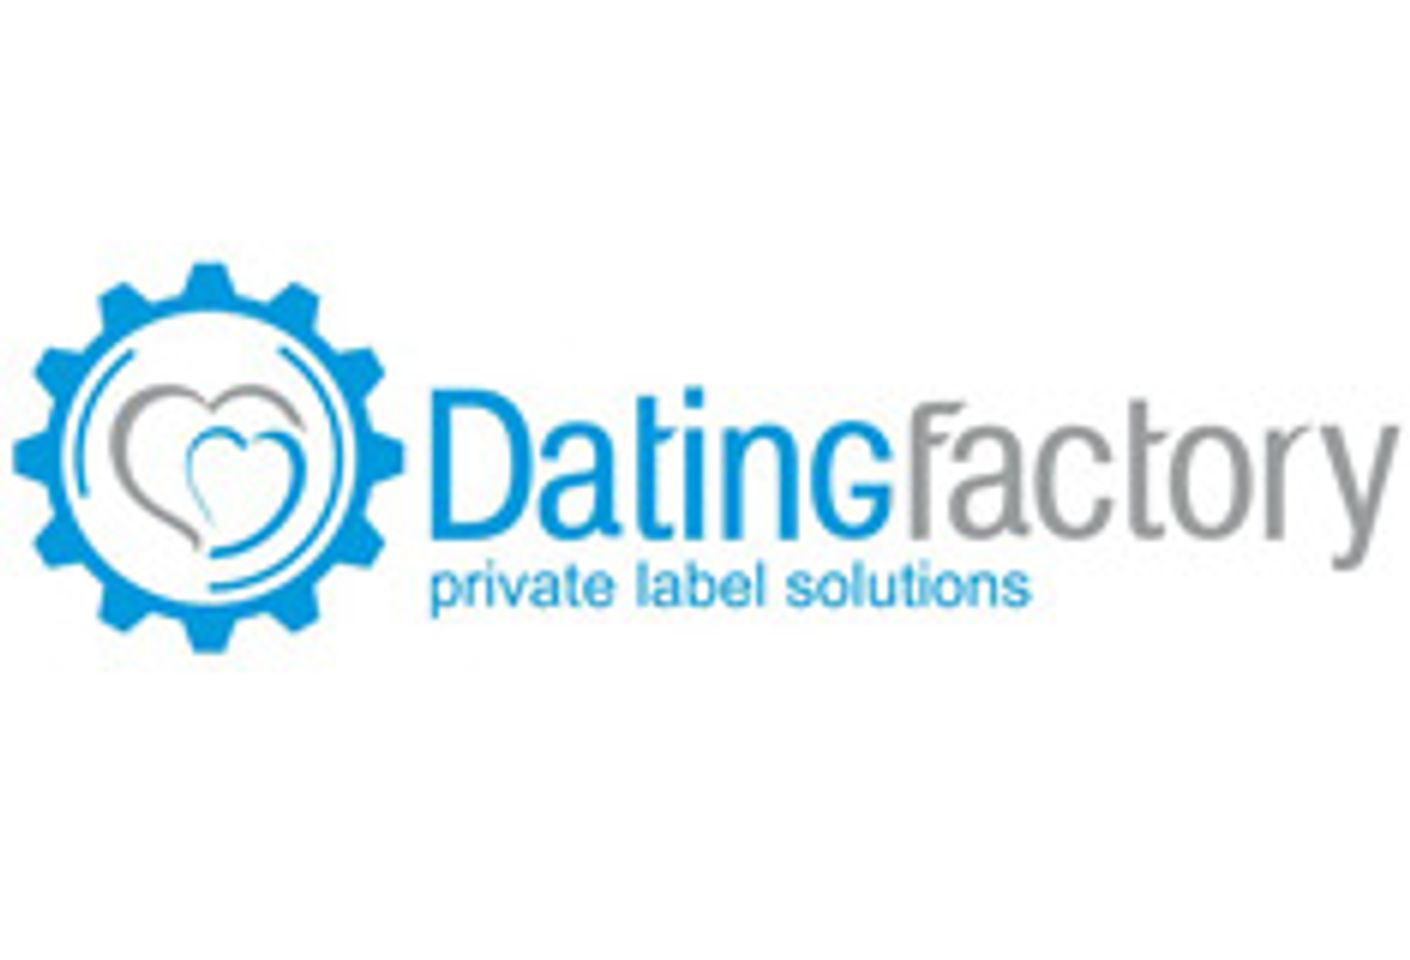 Dating Factory to Integrate NATS Backend Management System